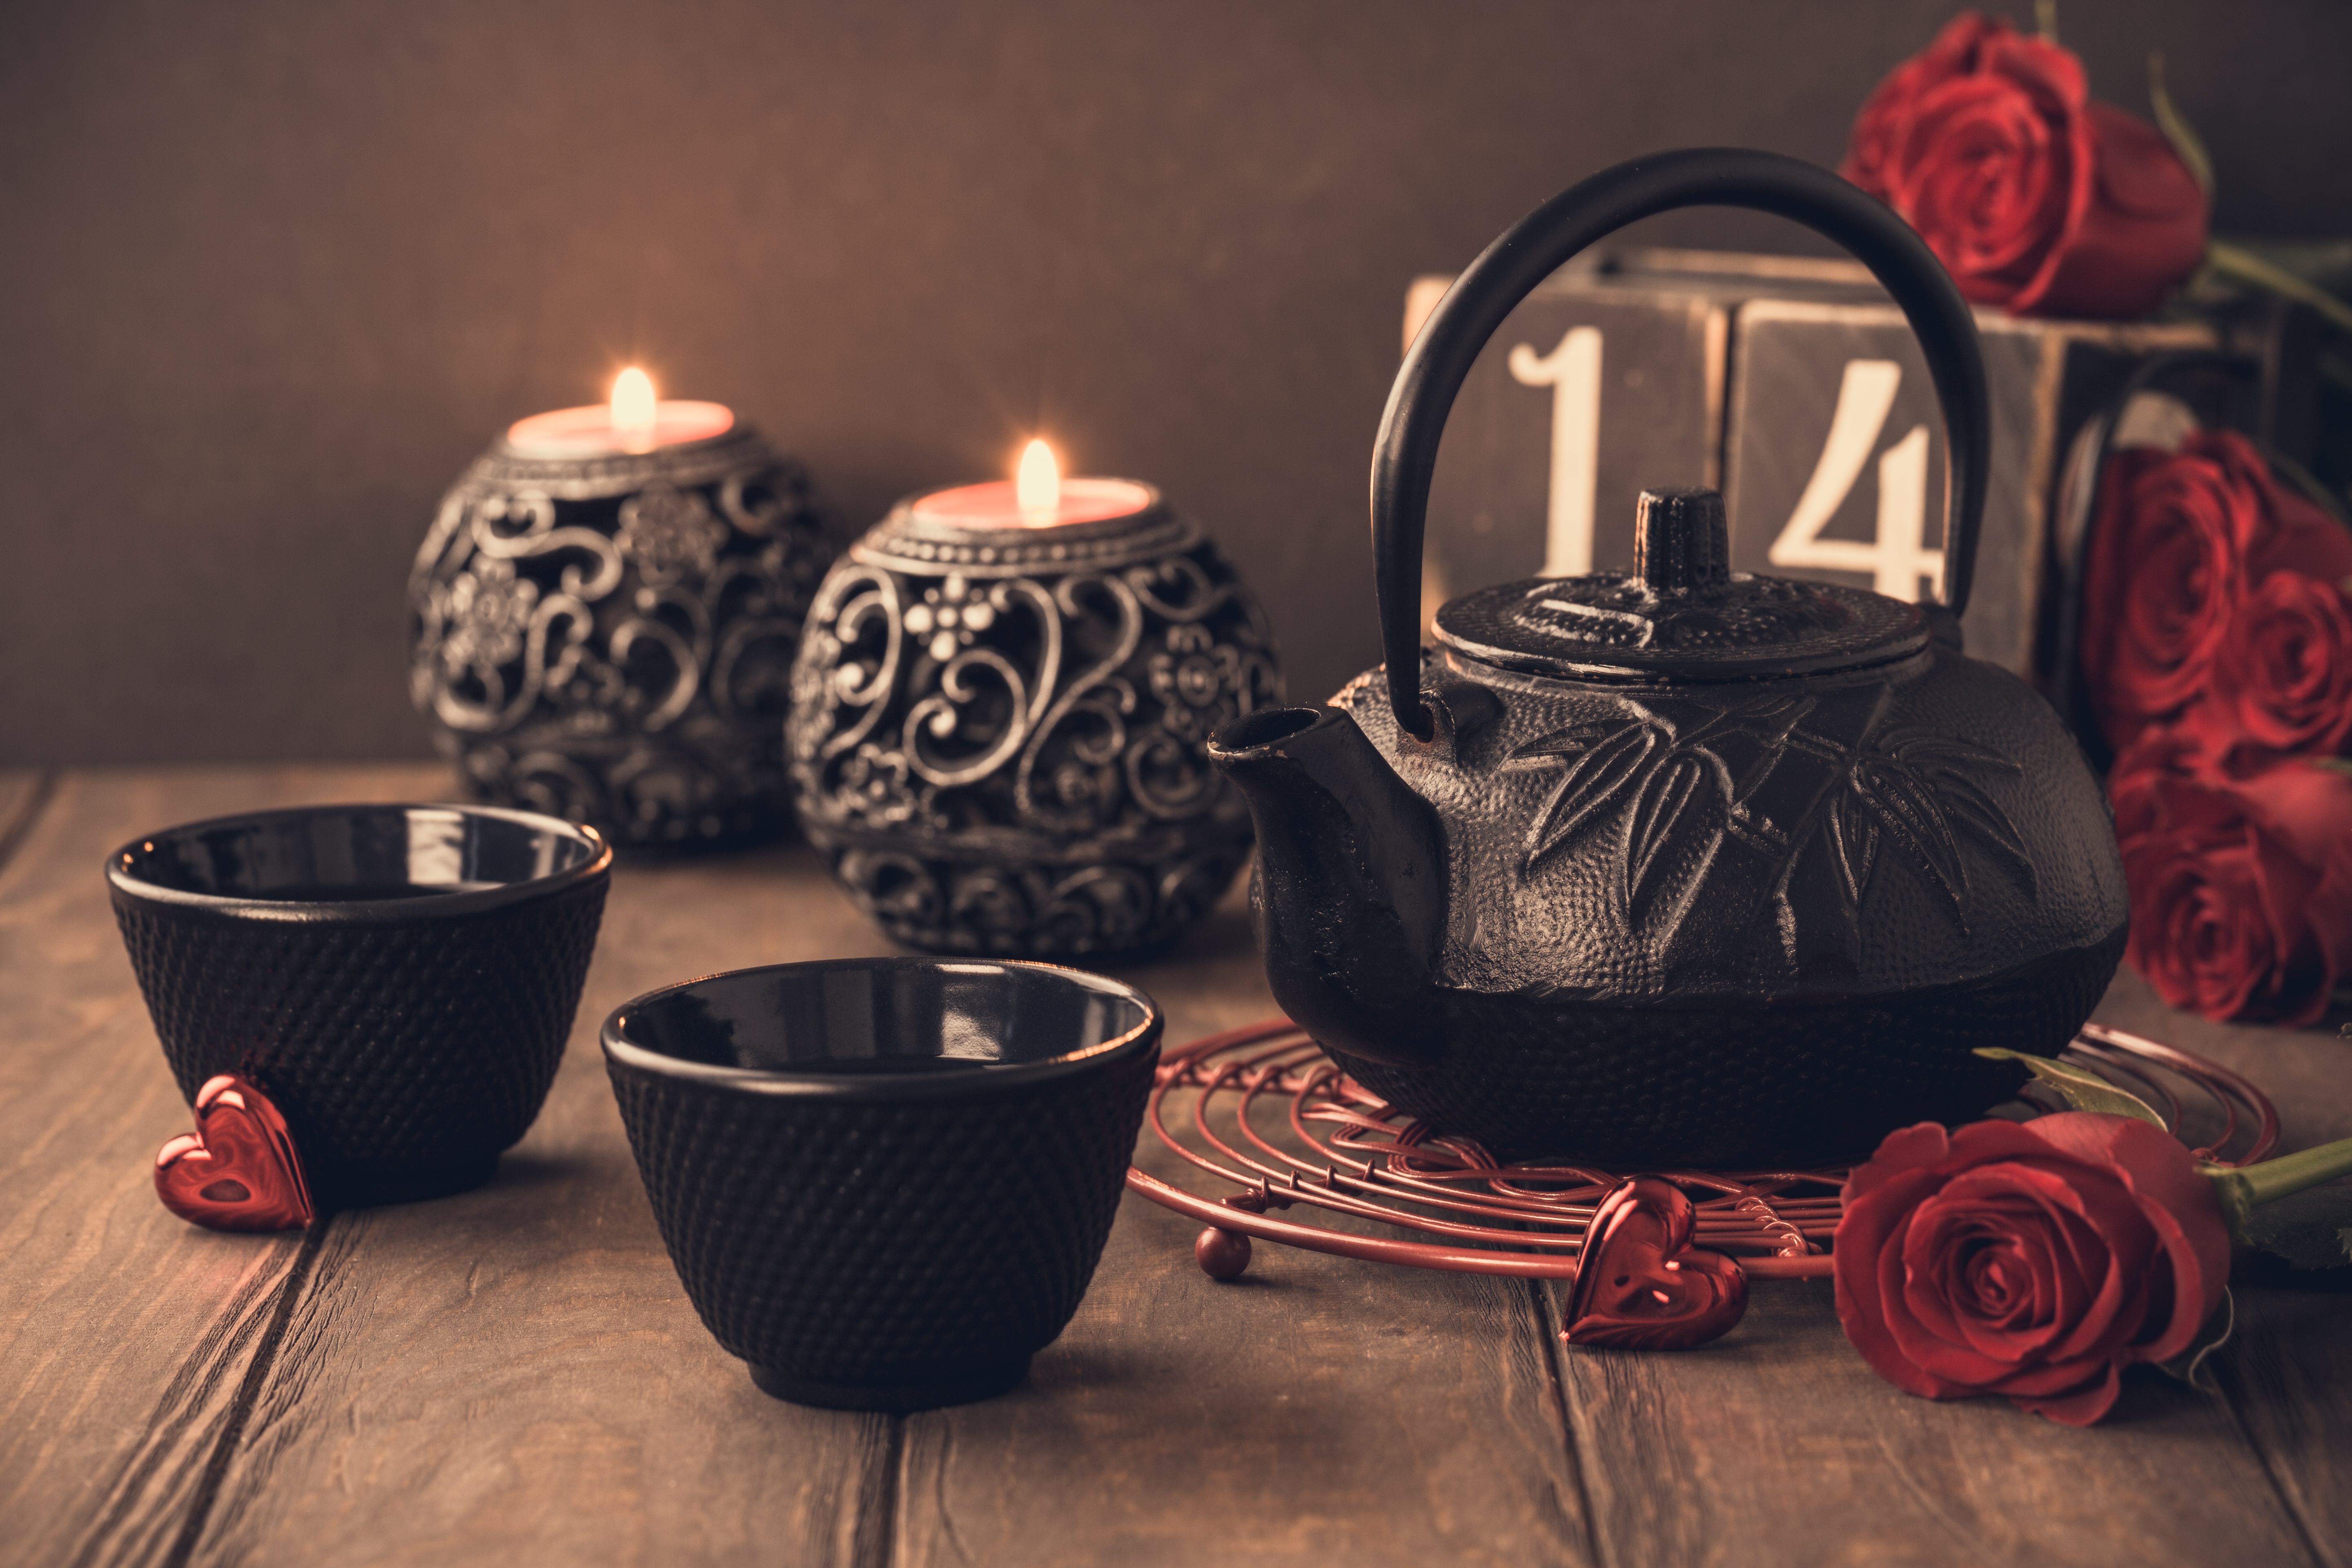 PC Wallpapers holiday, valentine's day, candle, cup, kettle, red flower, rose, still life